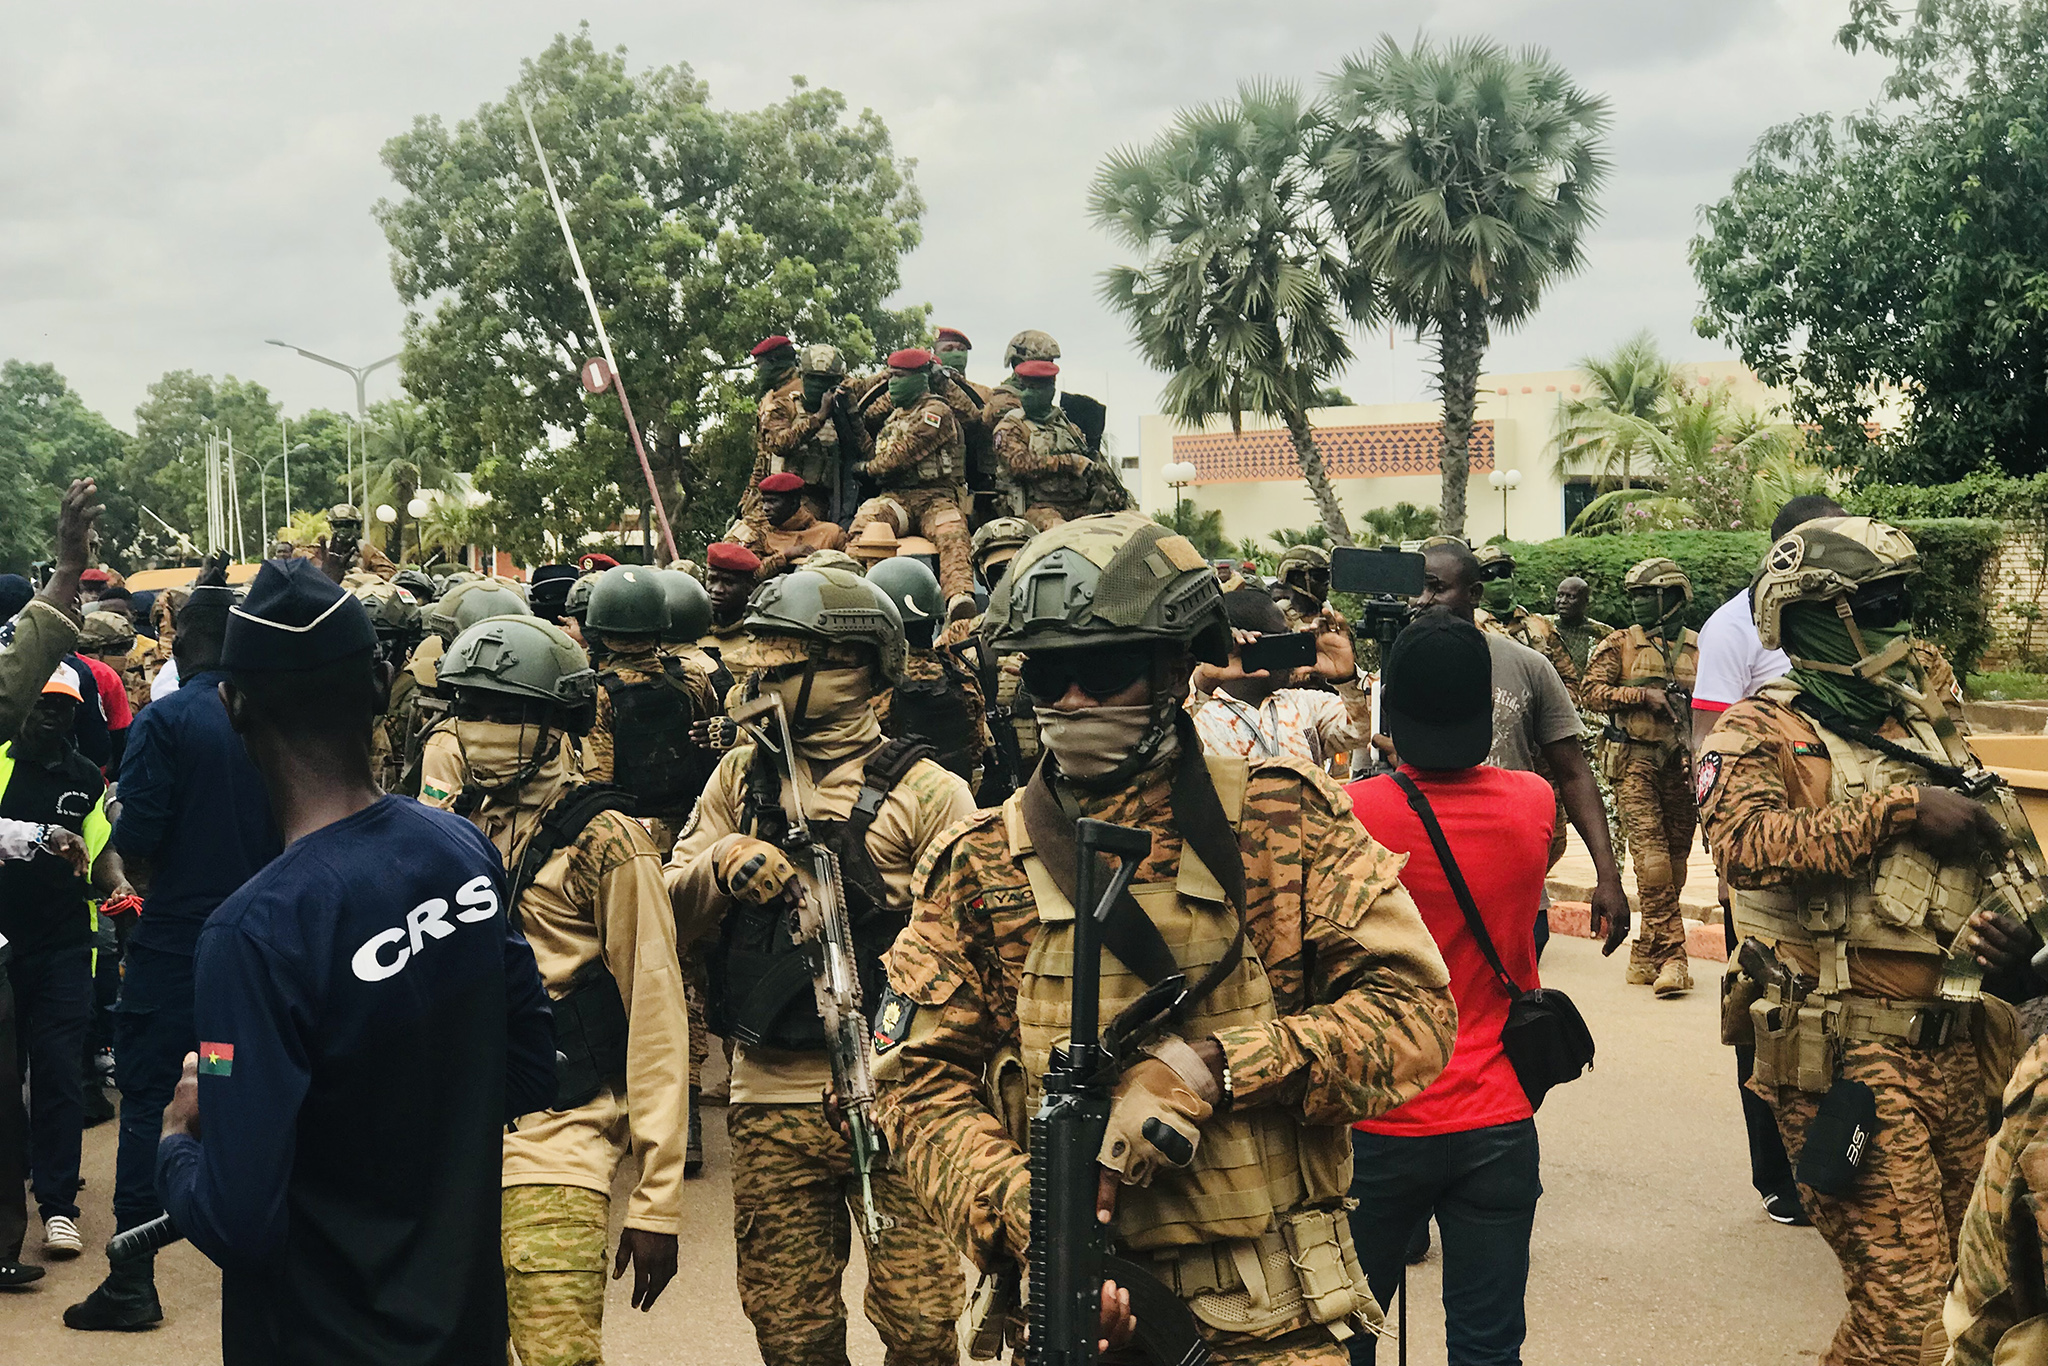 Burkina Faso troops deploy at their capital’s airport in July 2023 for the arrival of the country’s coup leader, army Captain Ibrahim Traore, from meetings in Moscow, including with Russian President Vladimir Putin. (EKokou/CC License 4.0)